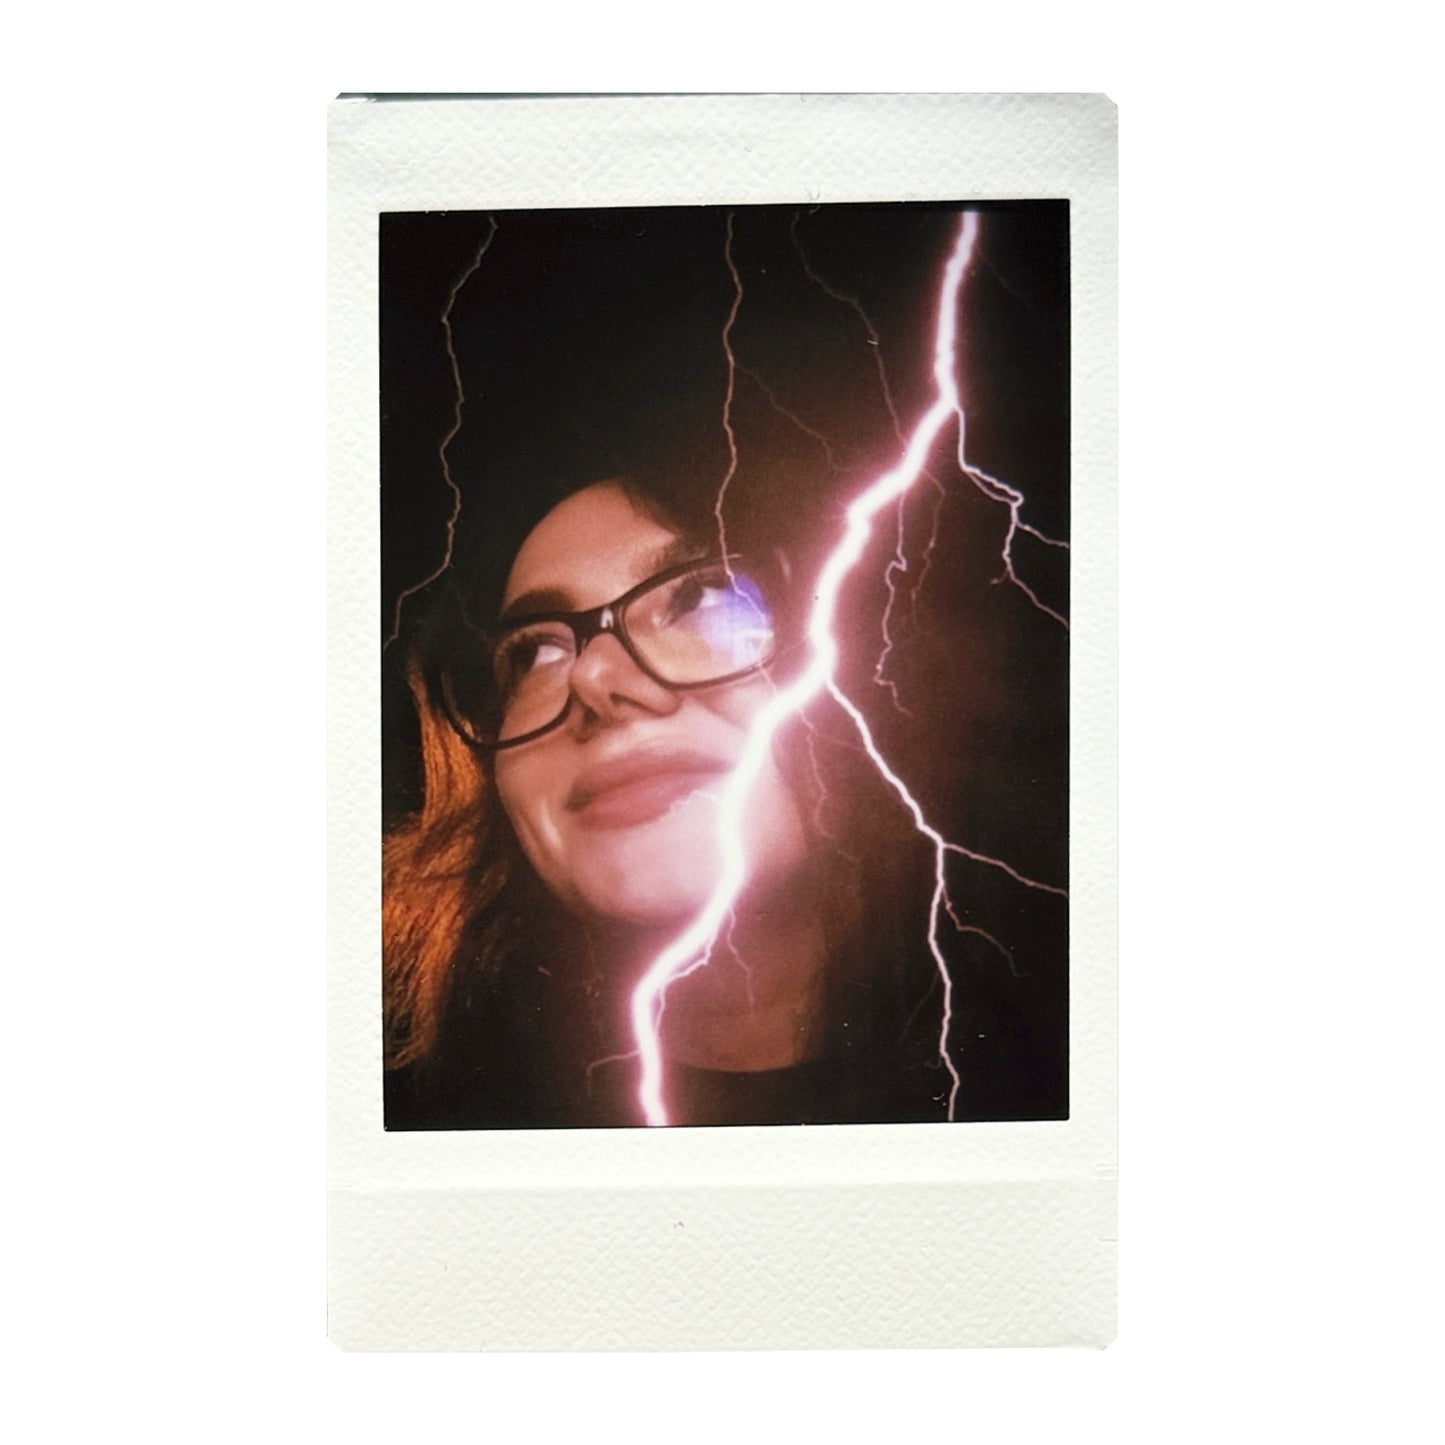 Double exposure instant photo of girl and the lighting made with Jollylook EYE